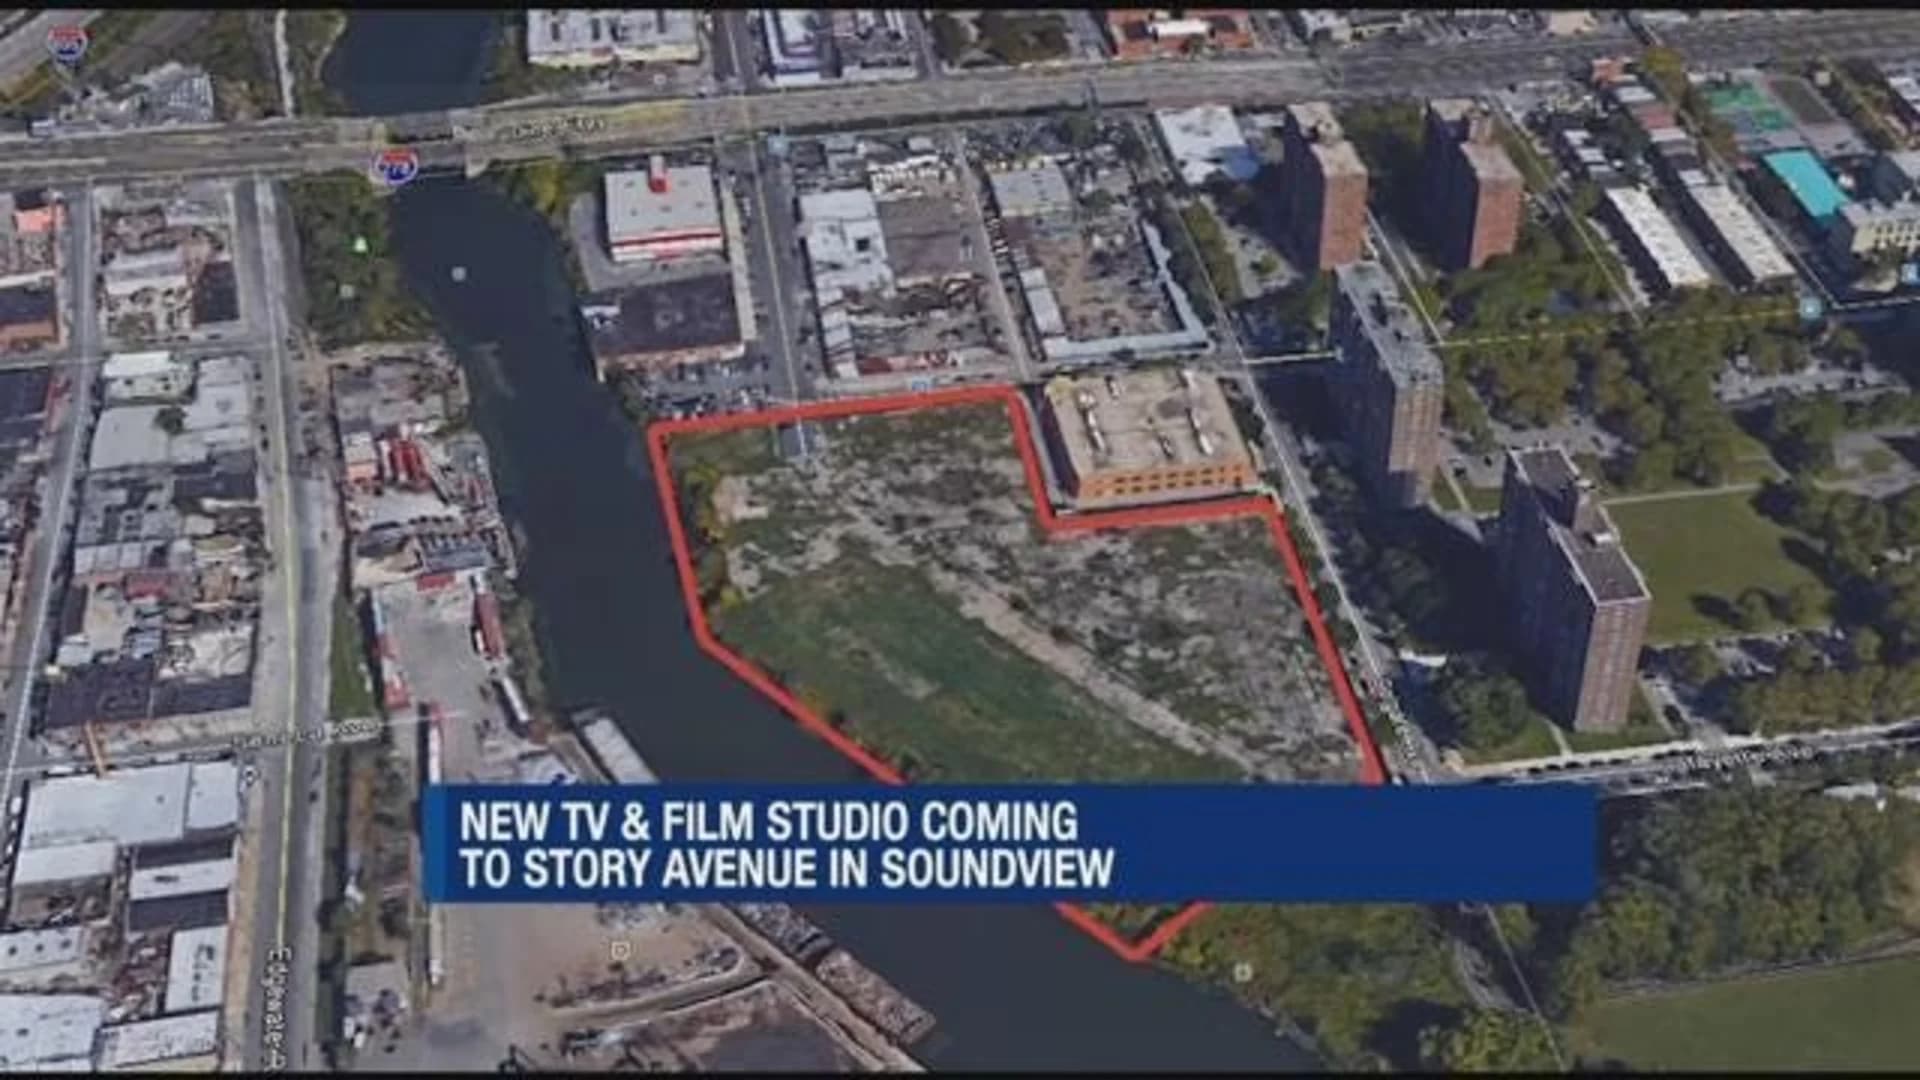 Production company breaks ground on 10-acre sound stage